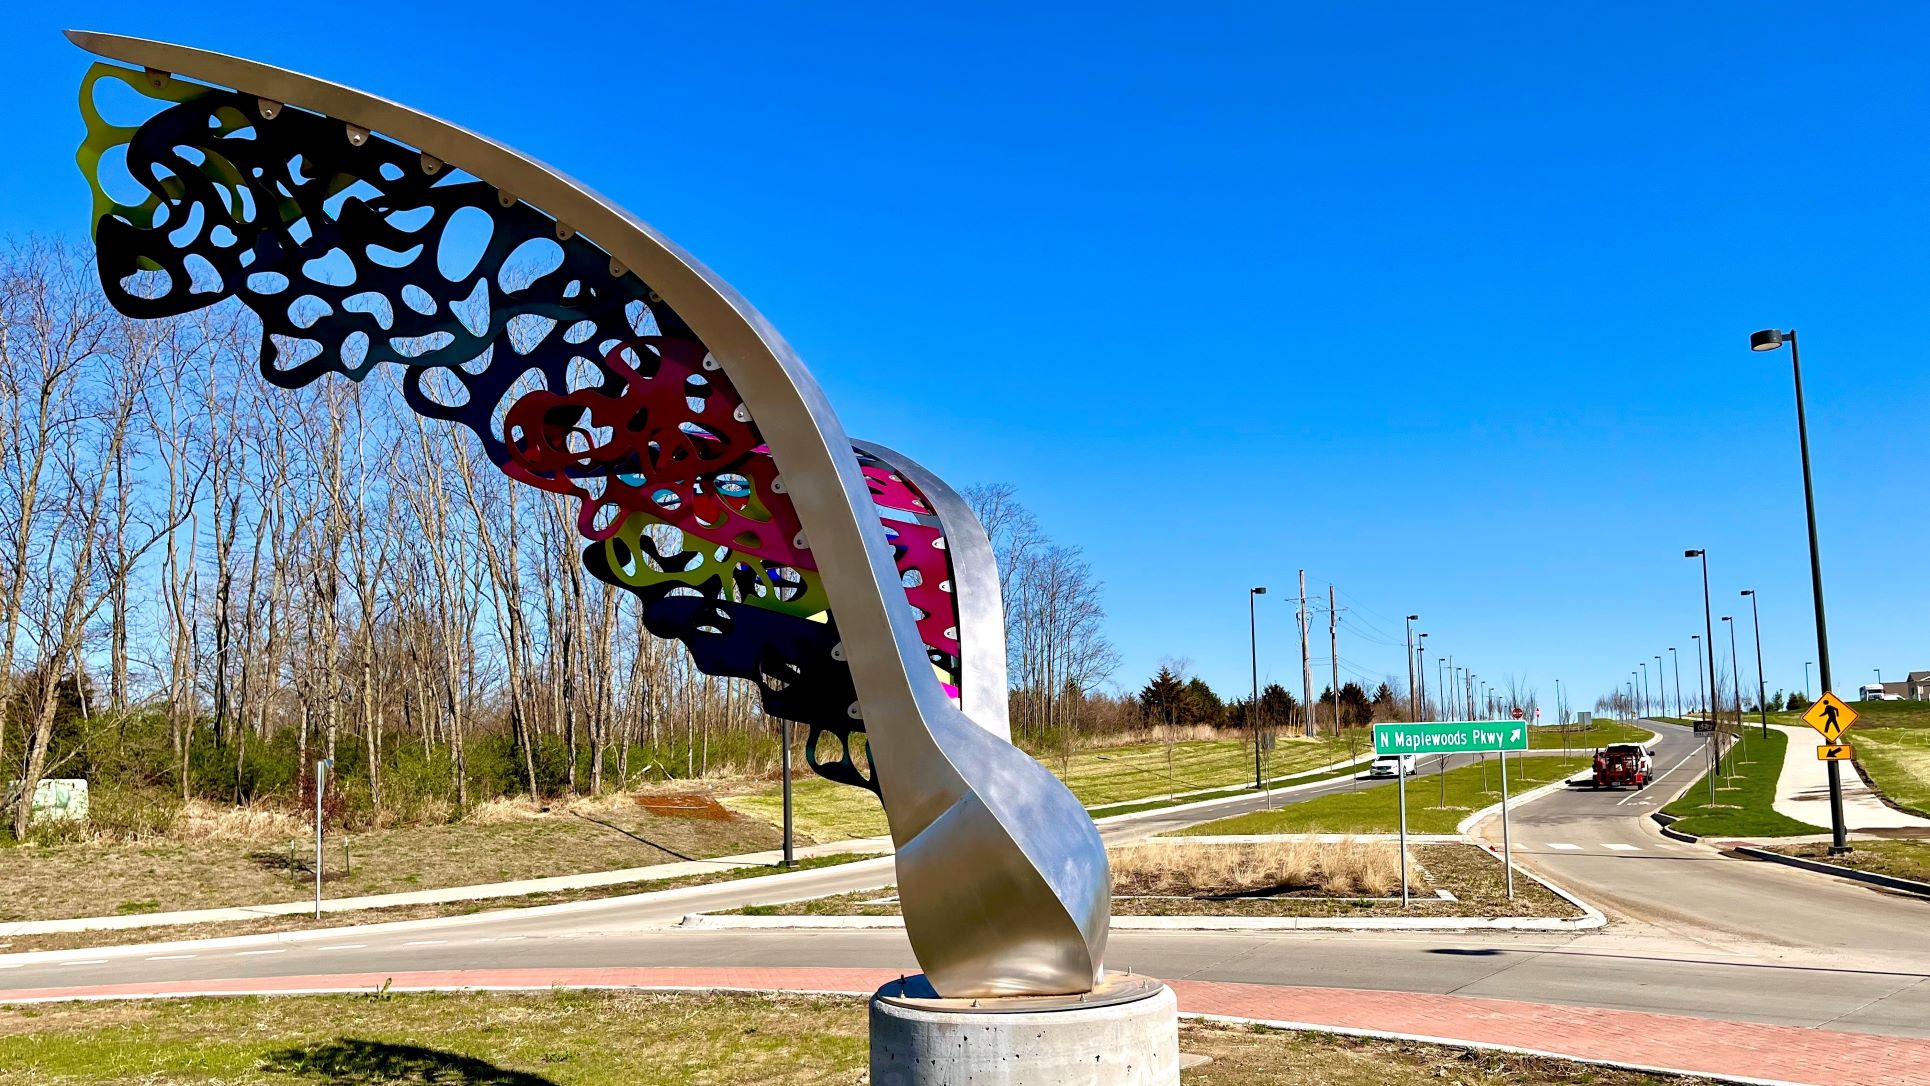 New work of public art for Maplewoods Parkway